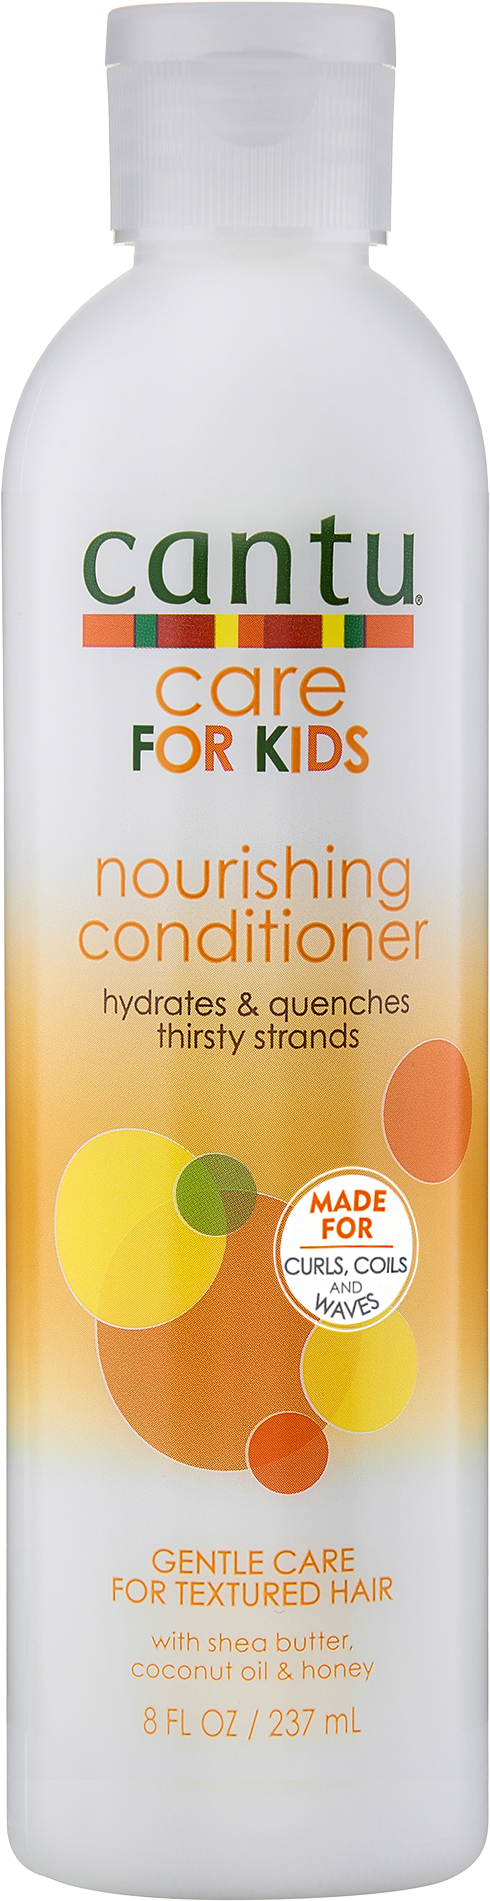 Care for Kids Nourishing Conditioner